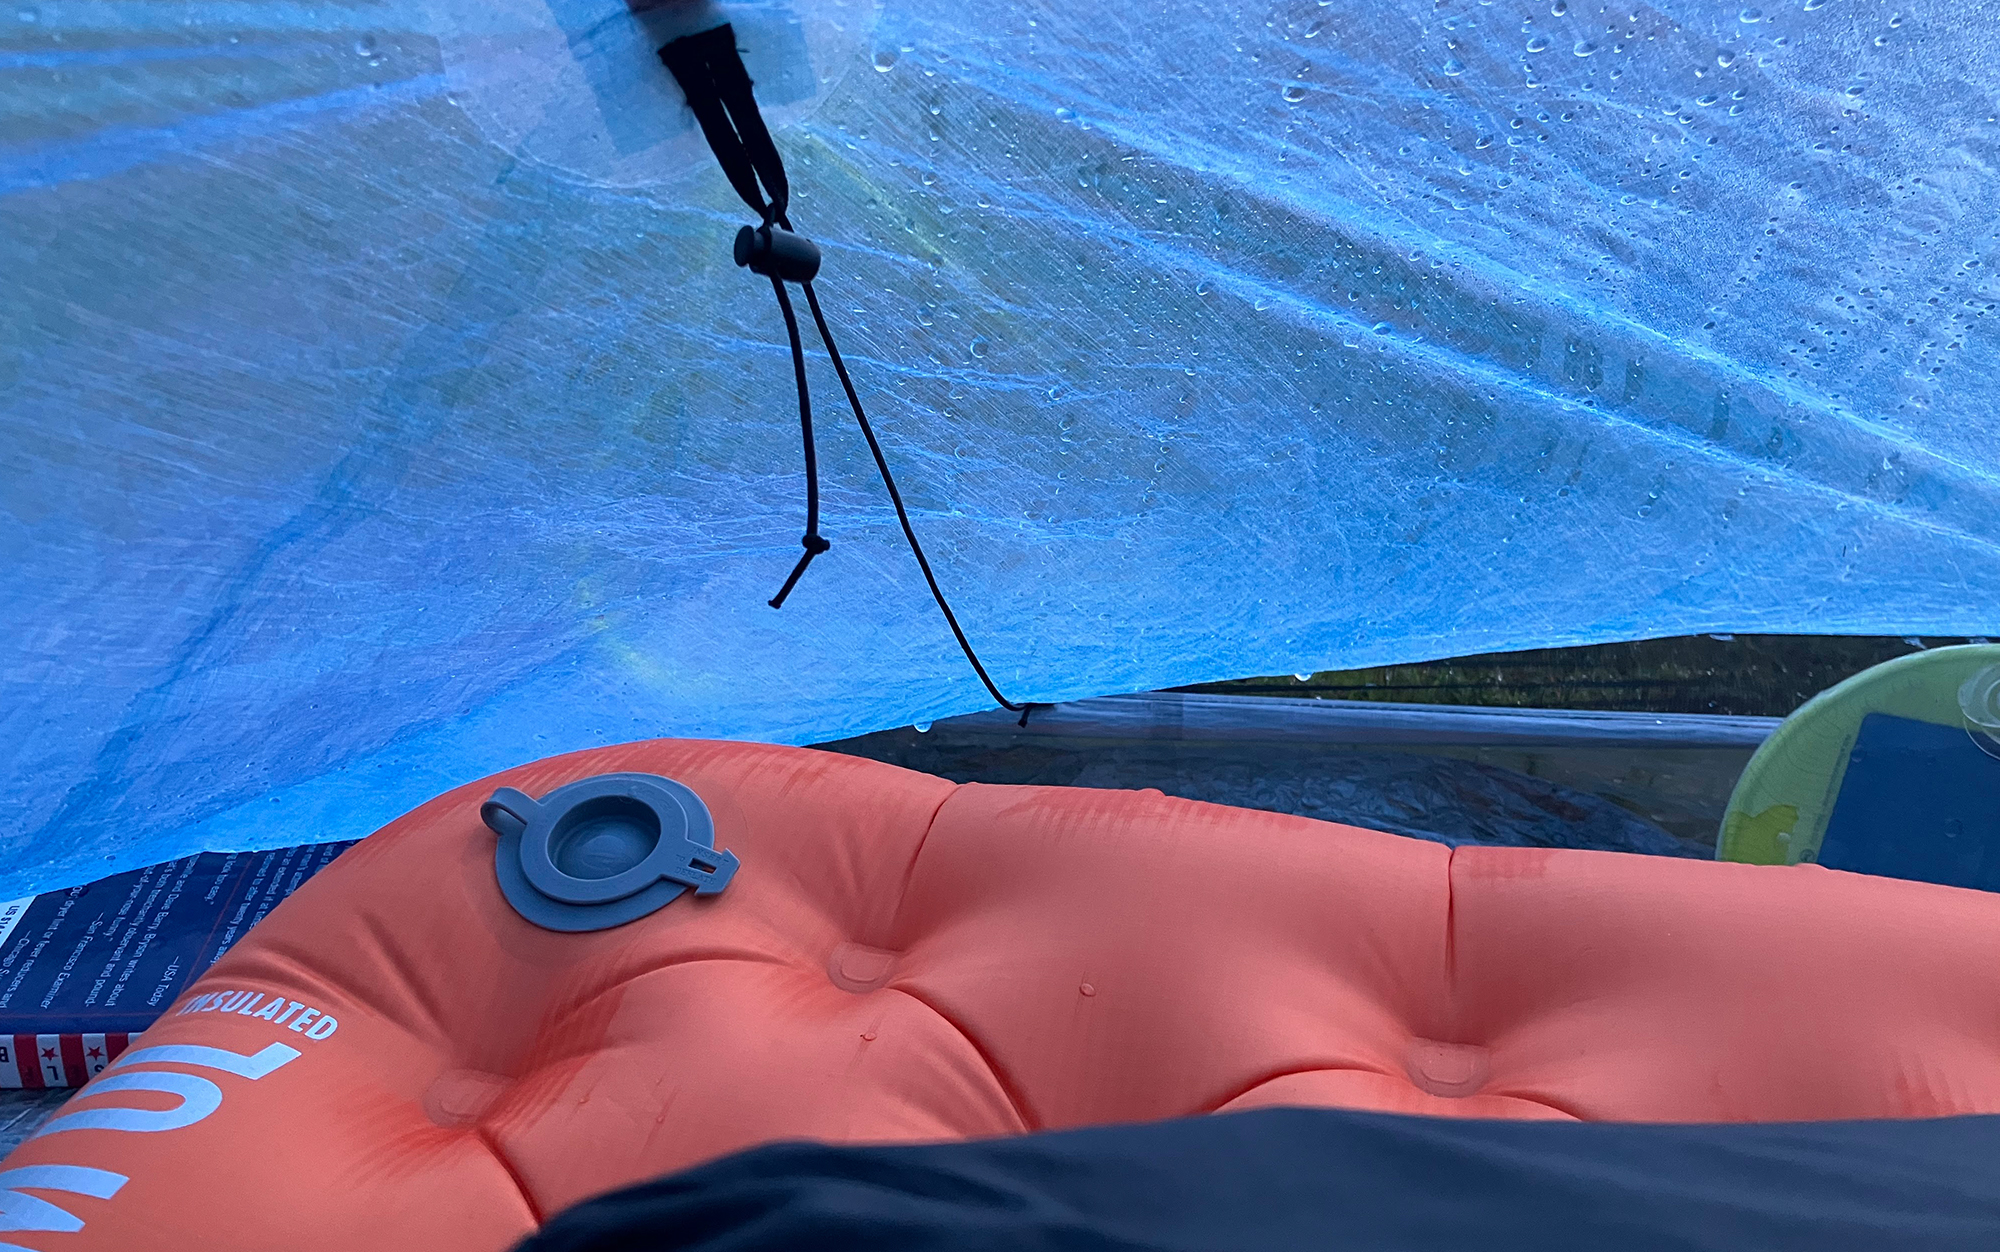 One of the biggest issues with incorrectly pitching the Zpacks Solo Plex is that it cuts down on your usable floor space. In the extreme condensation of the Oregon Coast, that meant our tester’s head and sleeping bag were both wet when she woke up in the morning.